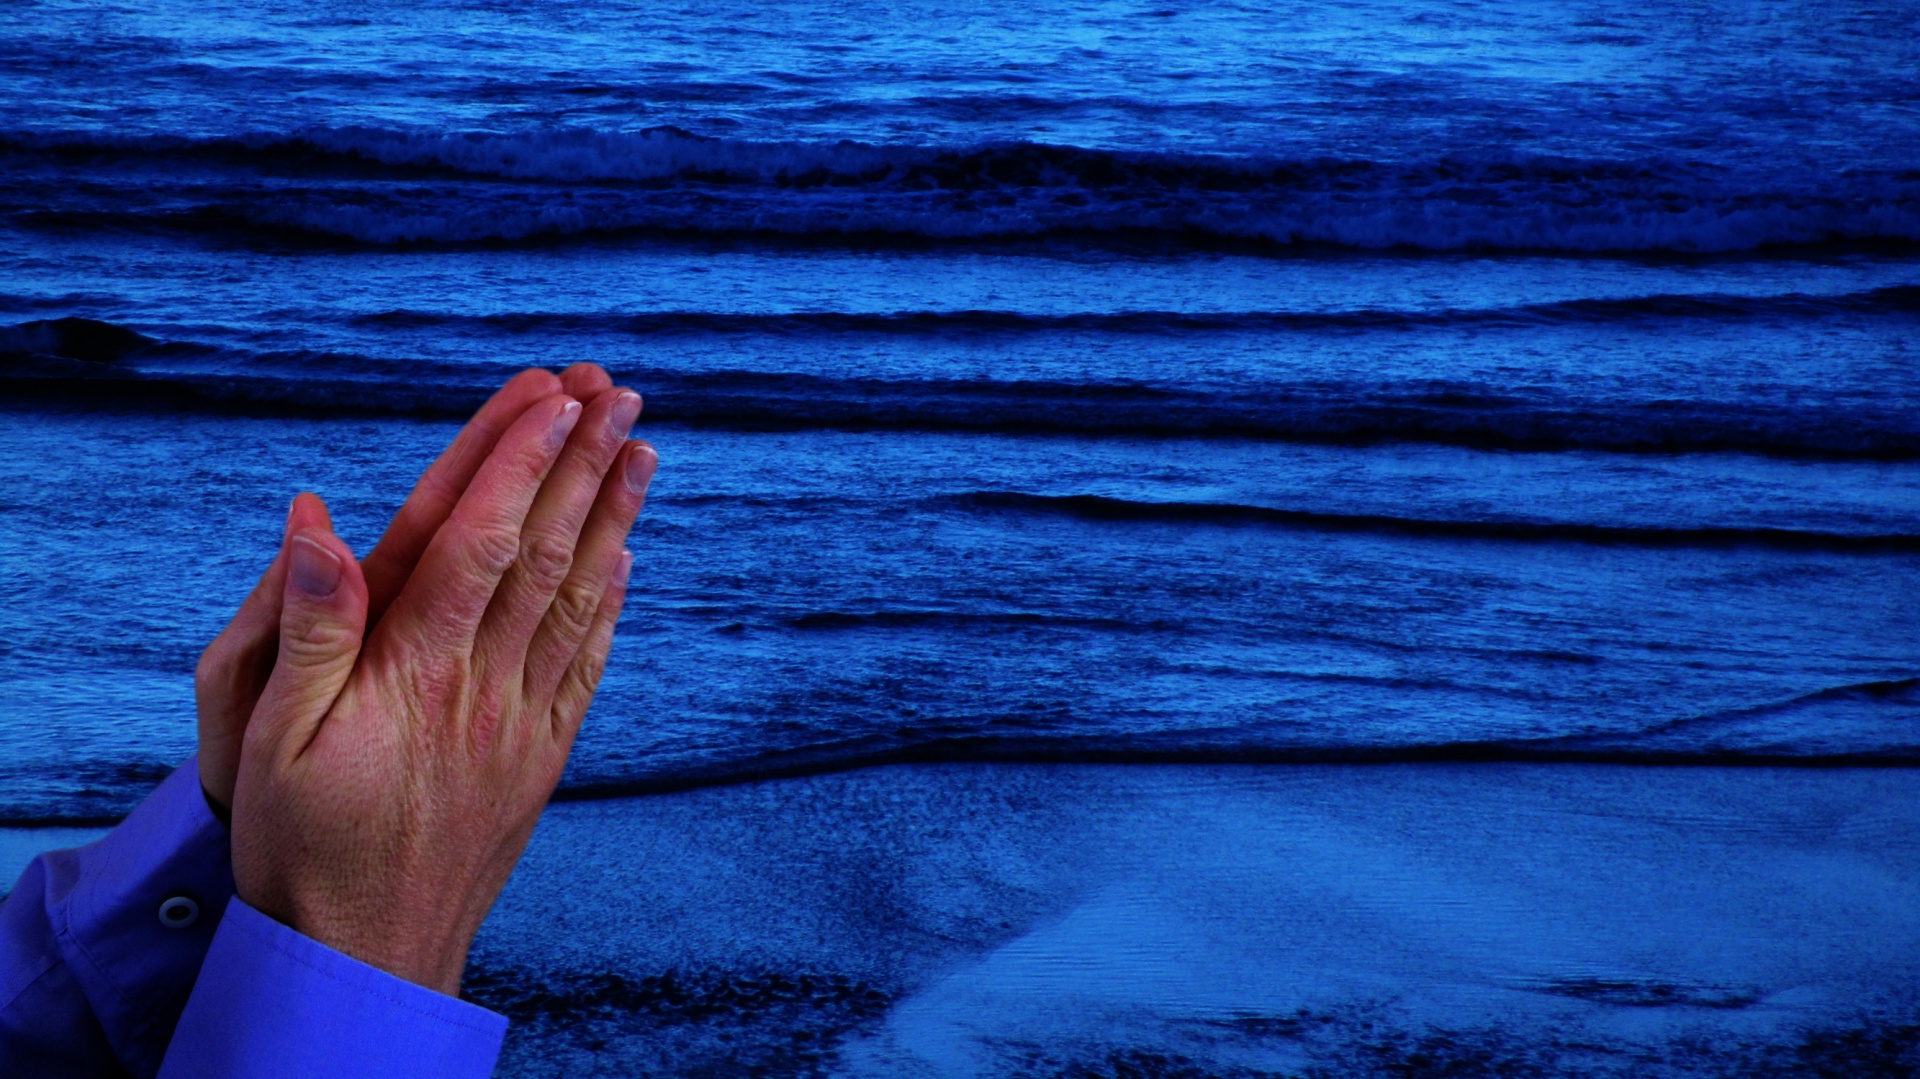 Praying hands with dark blue sea in the background.